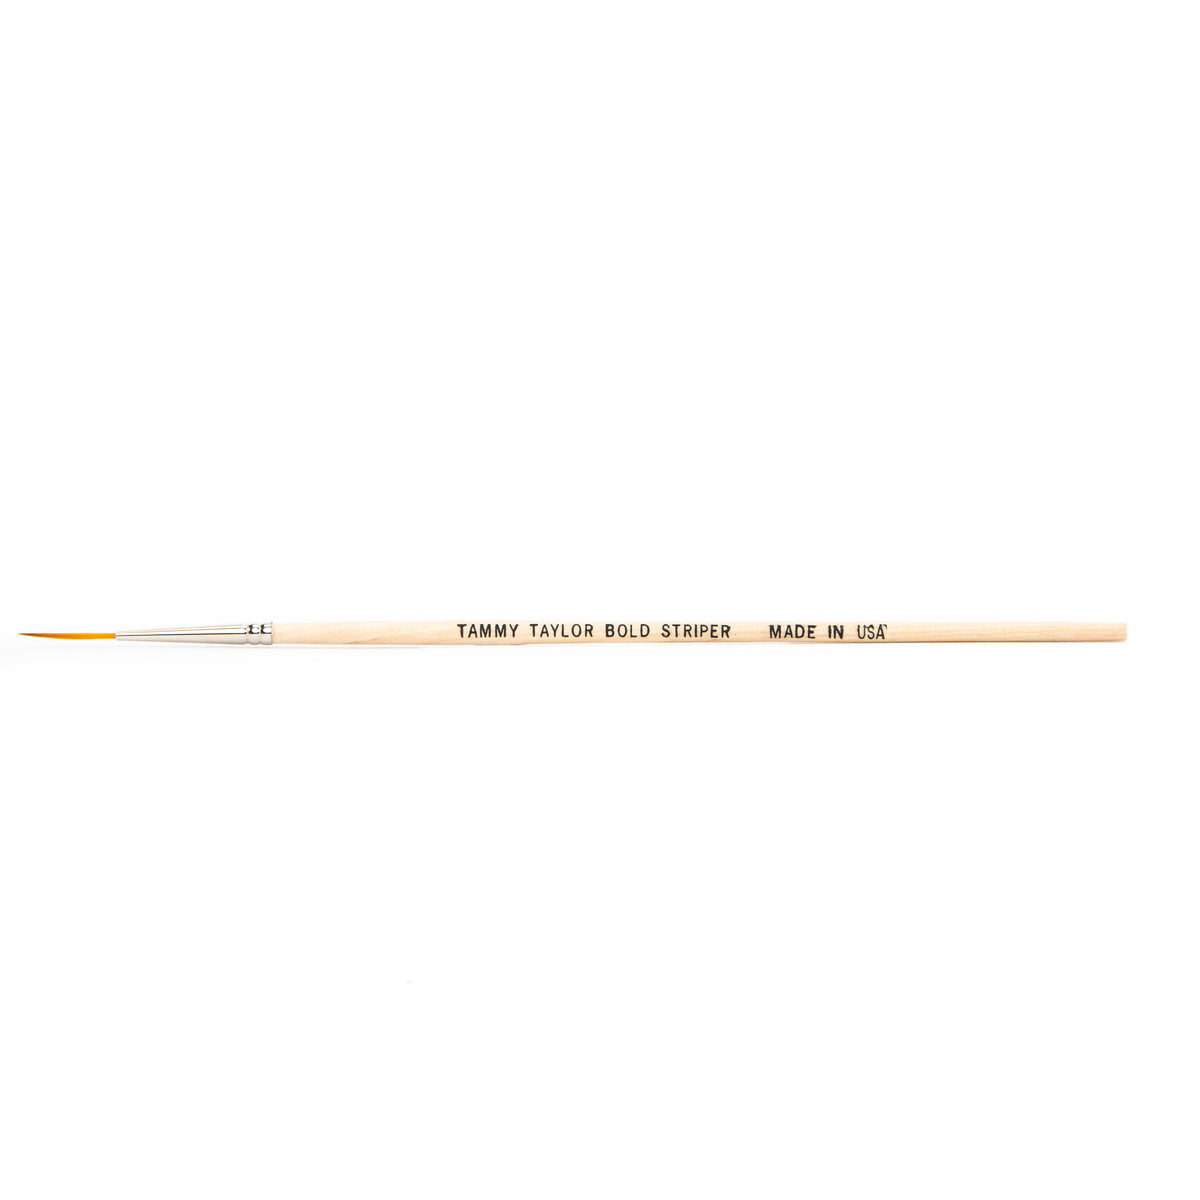 3D/One Stroke Artist Collection Brush